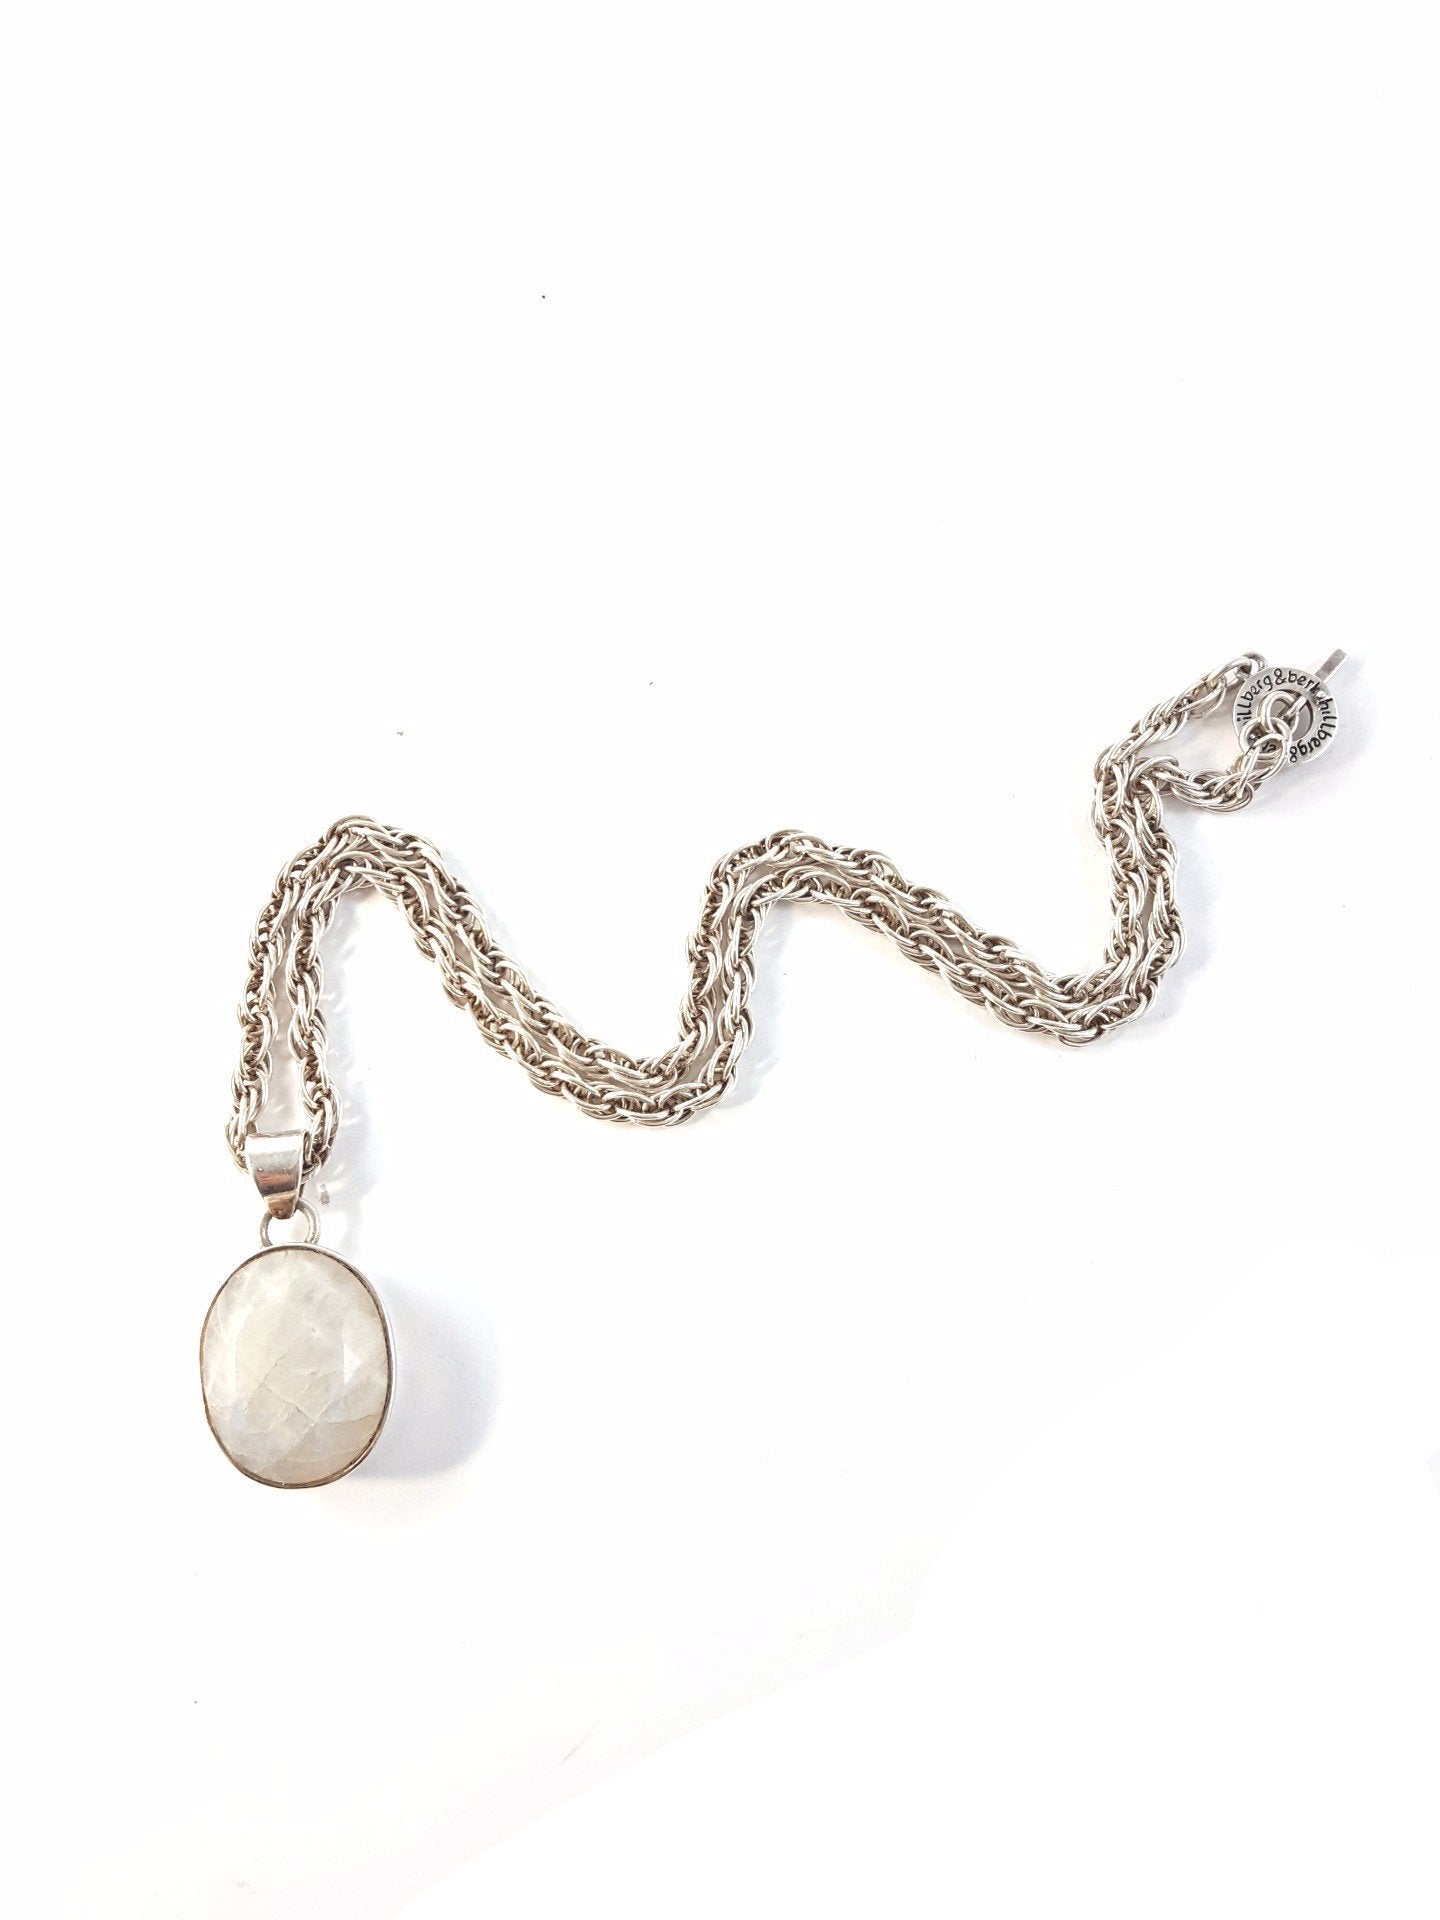 Faceted Moonstone Necklace